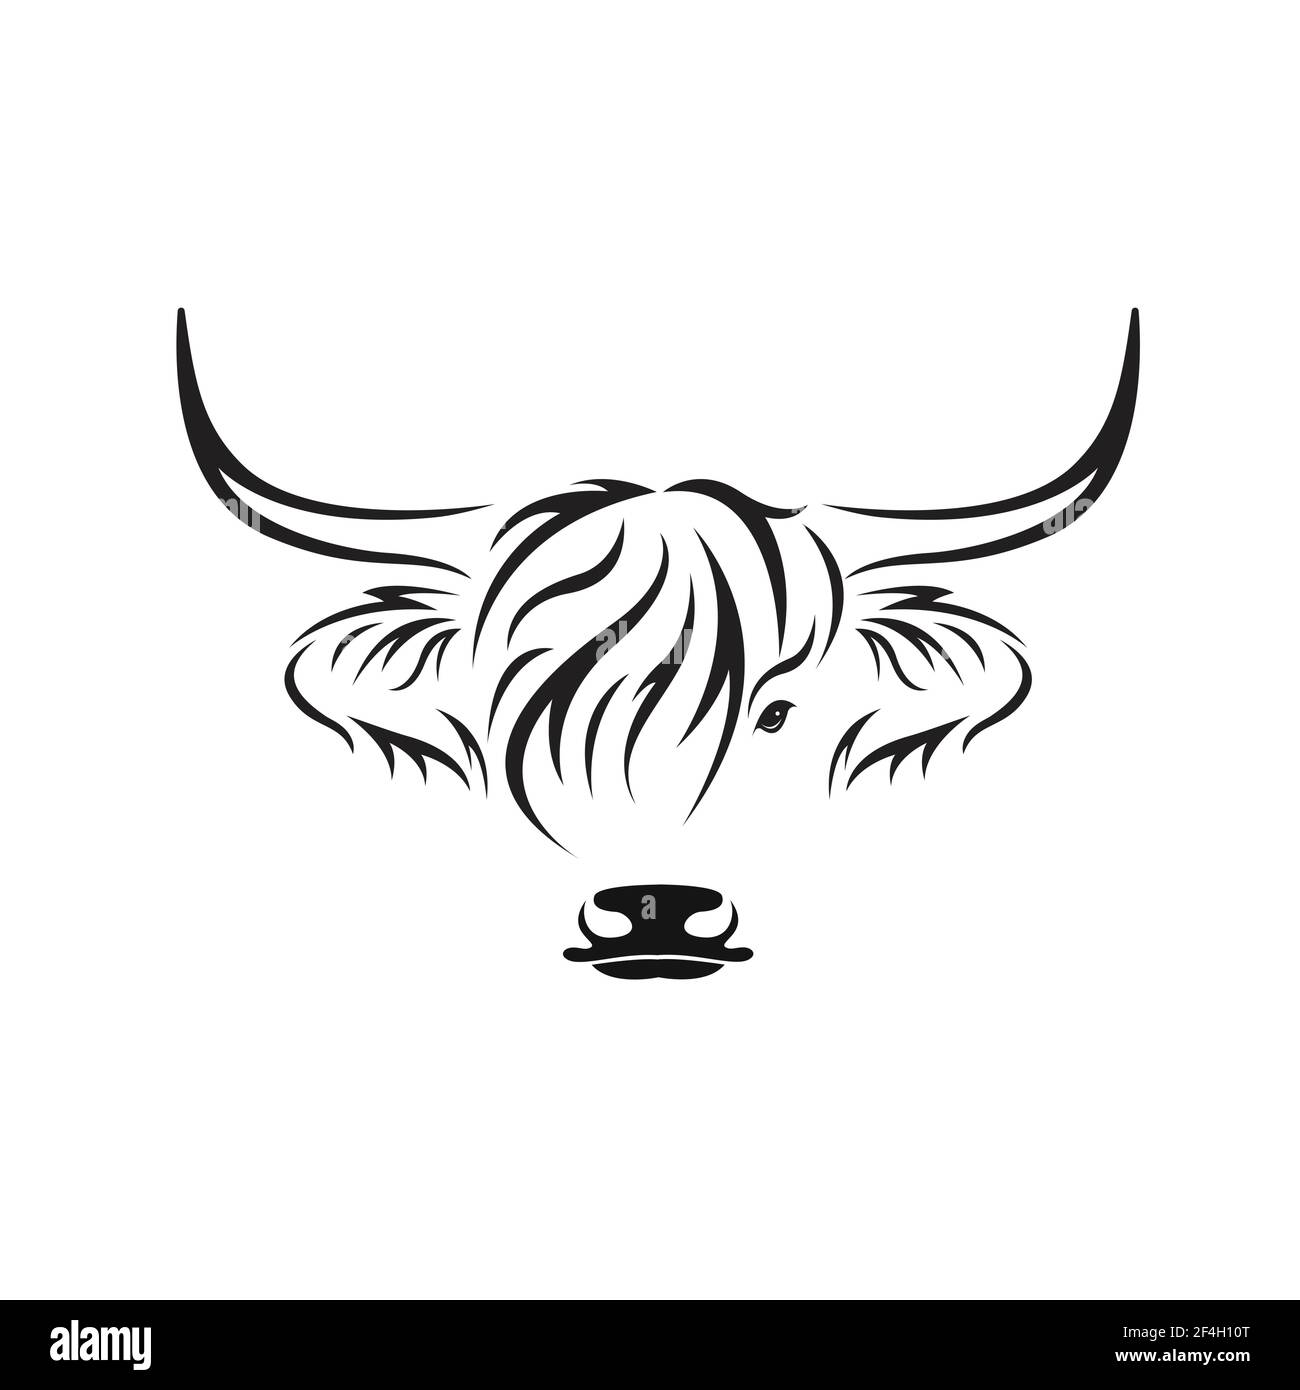 Vector of highland cow head design on white background. Farm Animal. Cows logos or icons. Easy editable layered vector illustration. Stock Vector